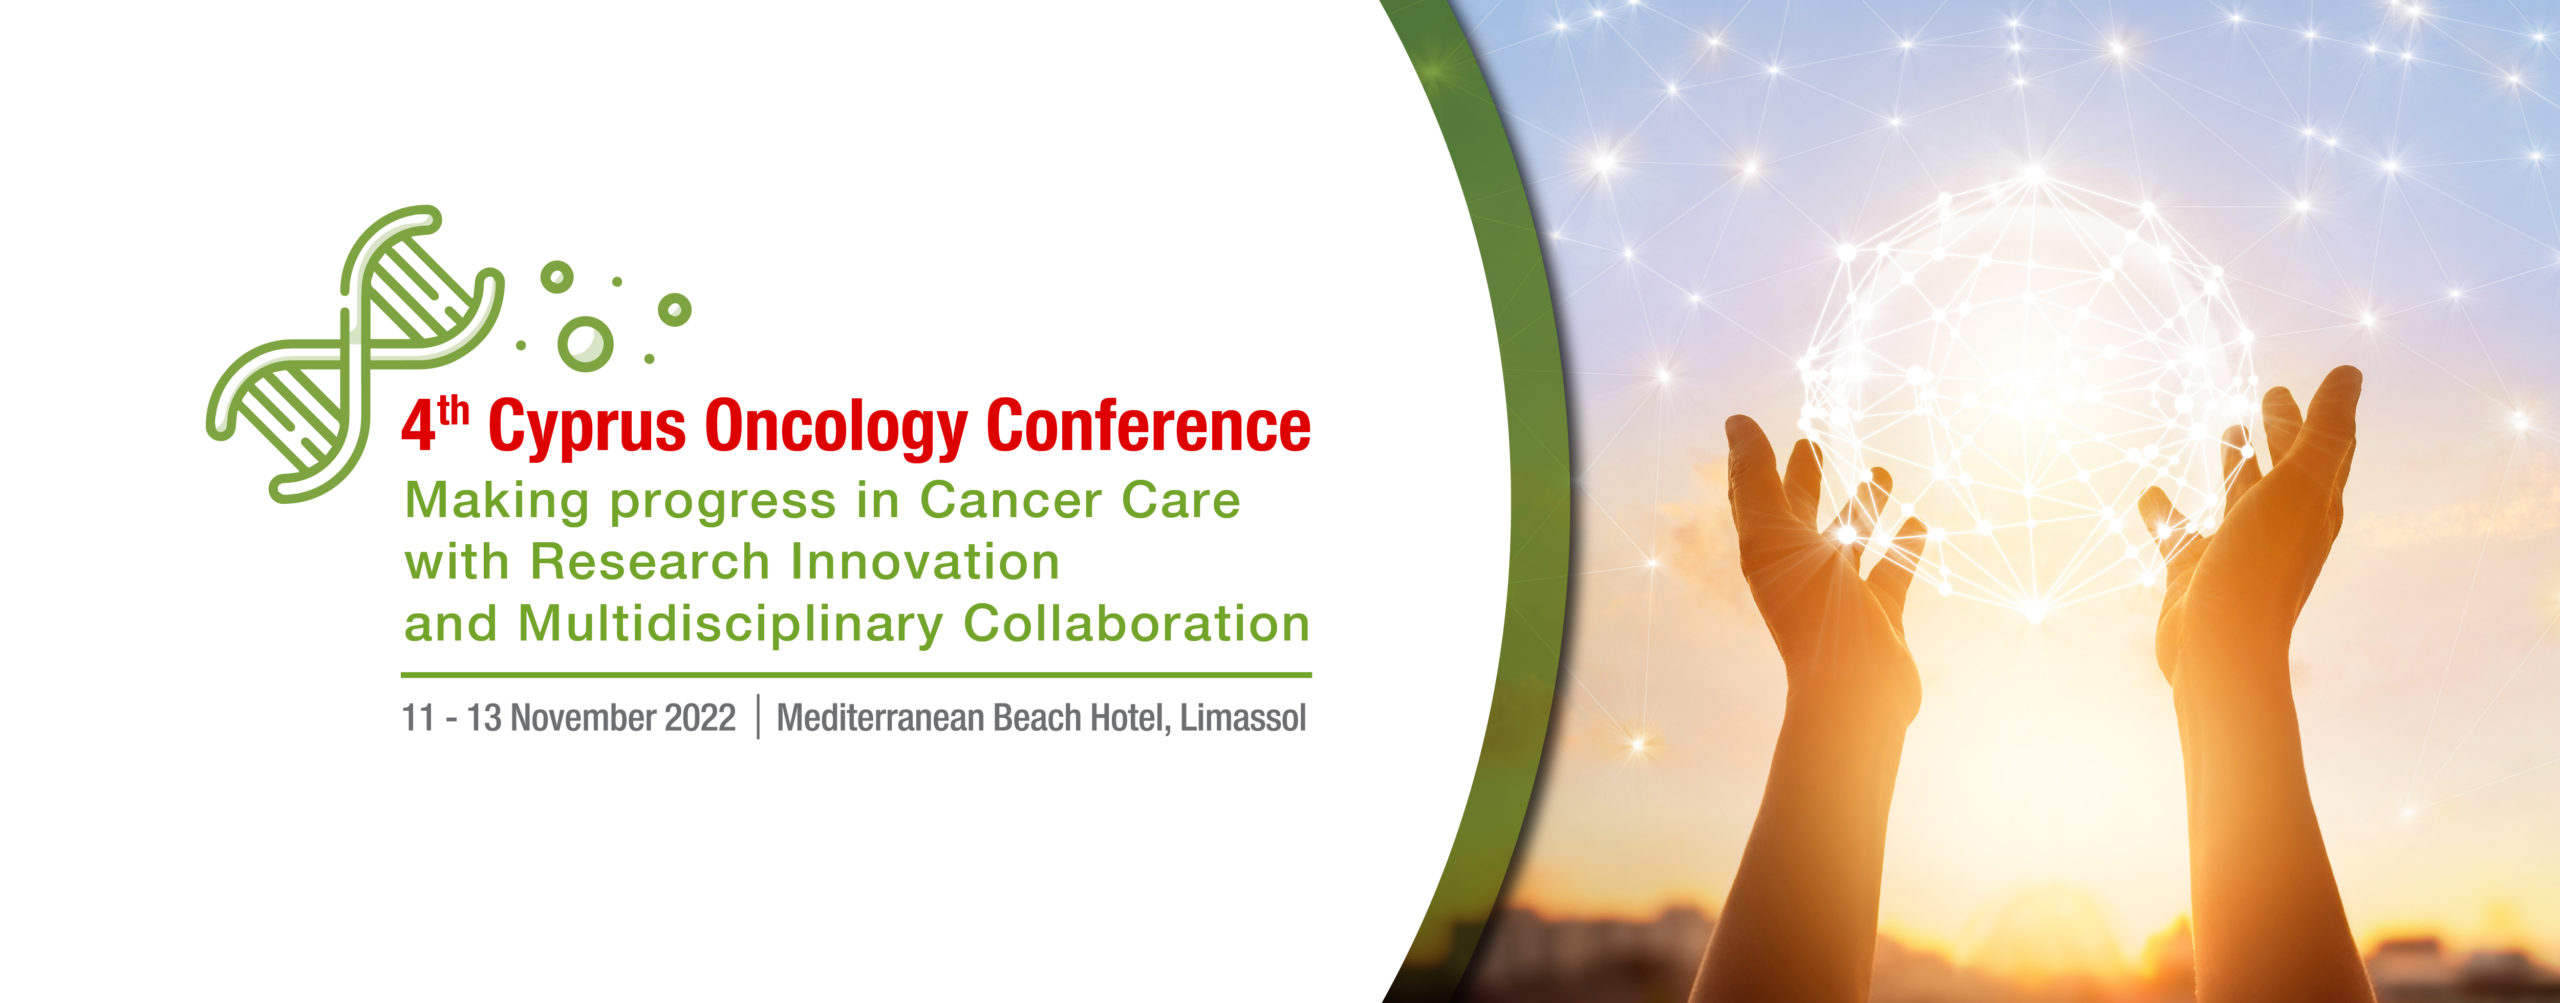 anticancer conf web banner 1200x470 new scaled